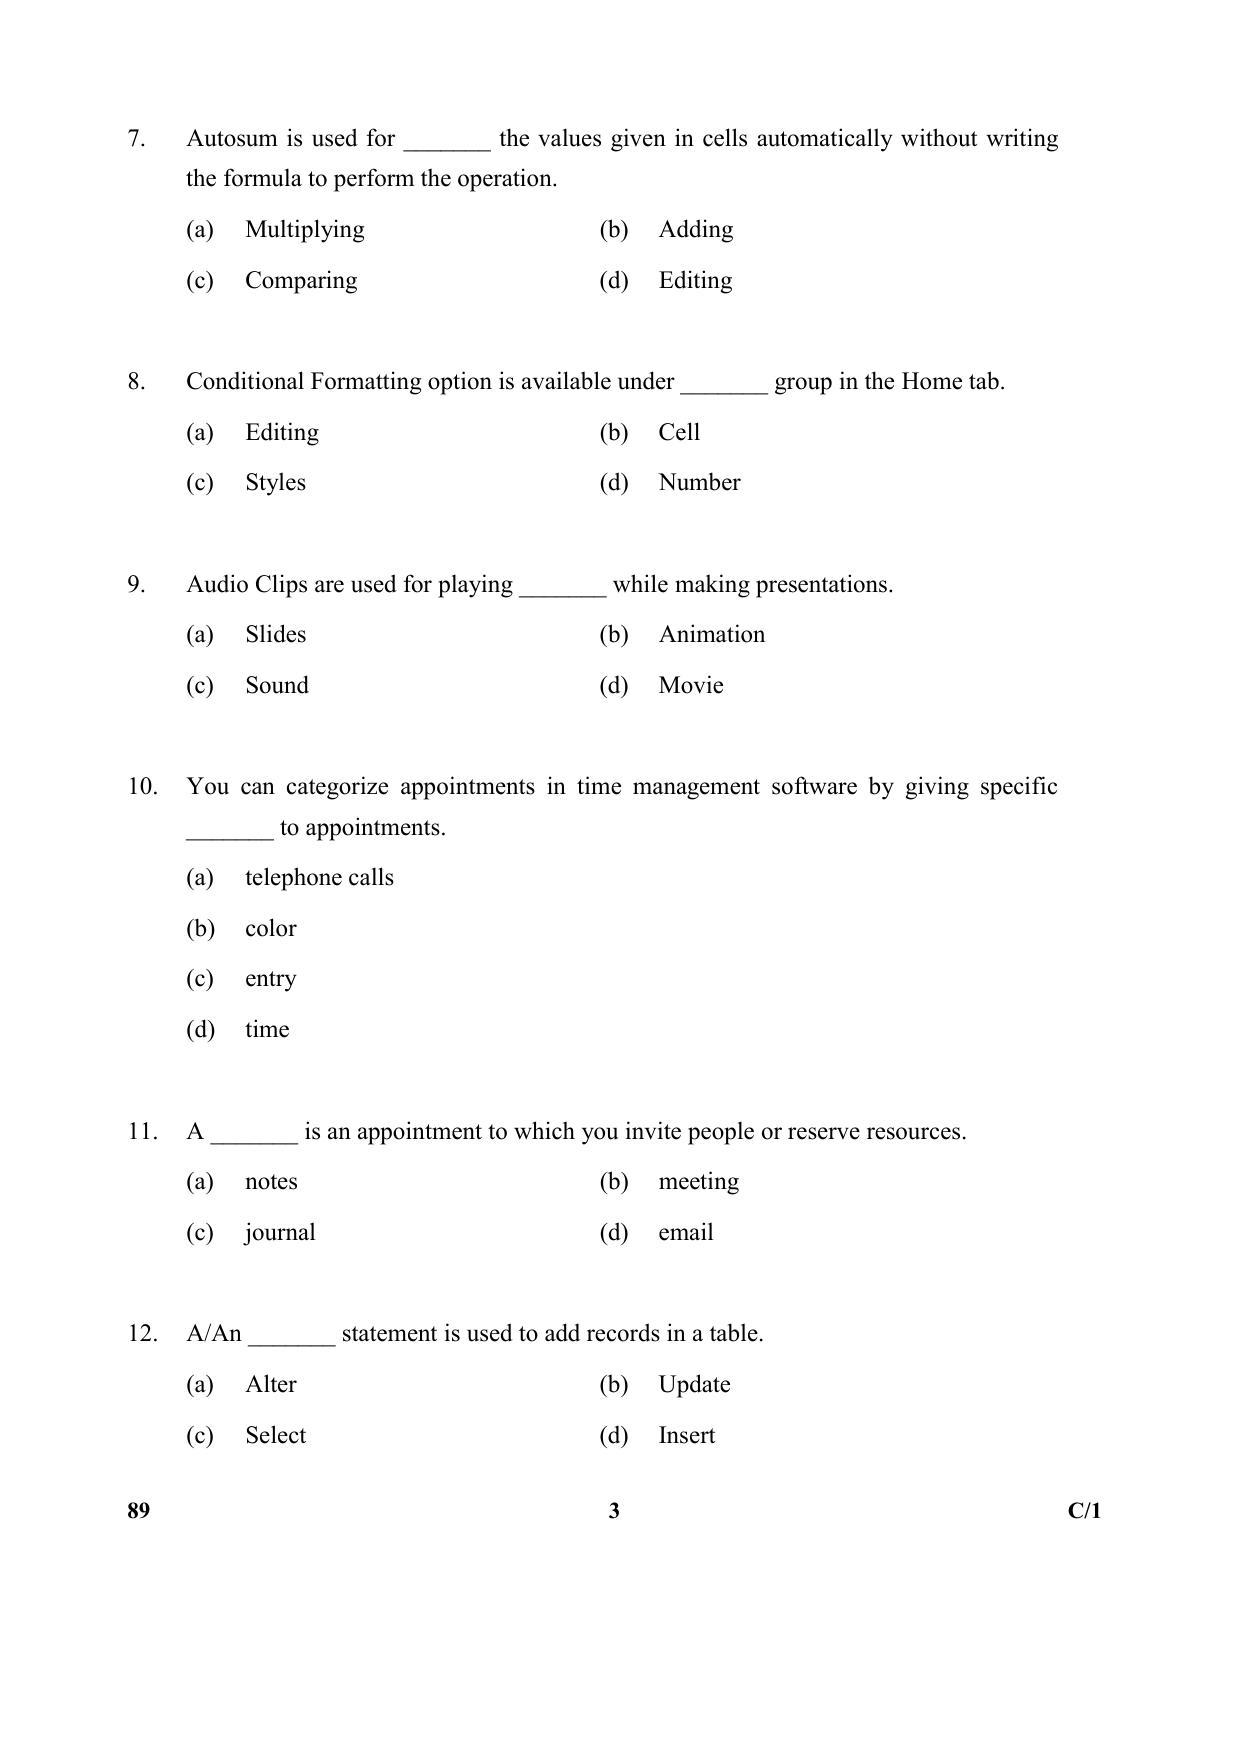 CBSE Class 10 89 (Information Technology) 2018 Compartment Question Paper - Page 3